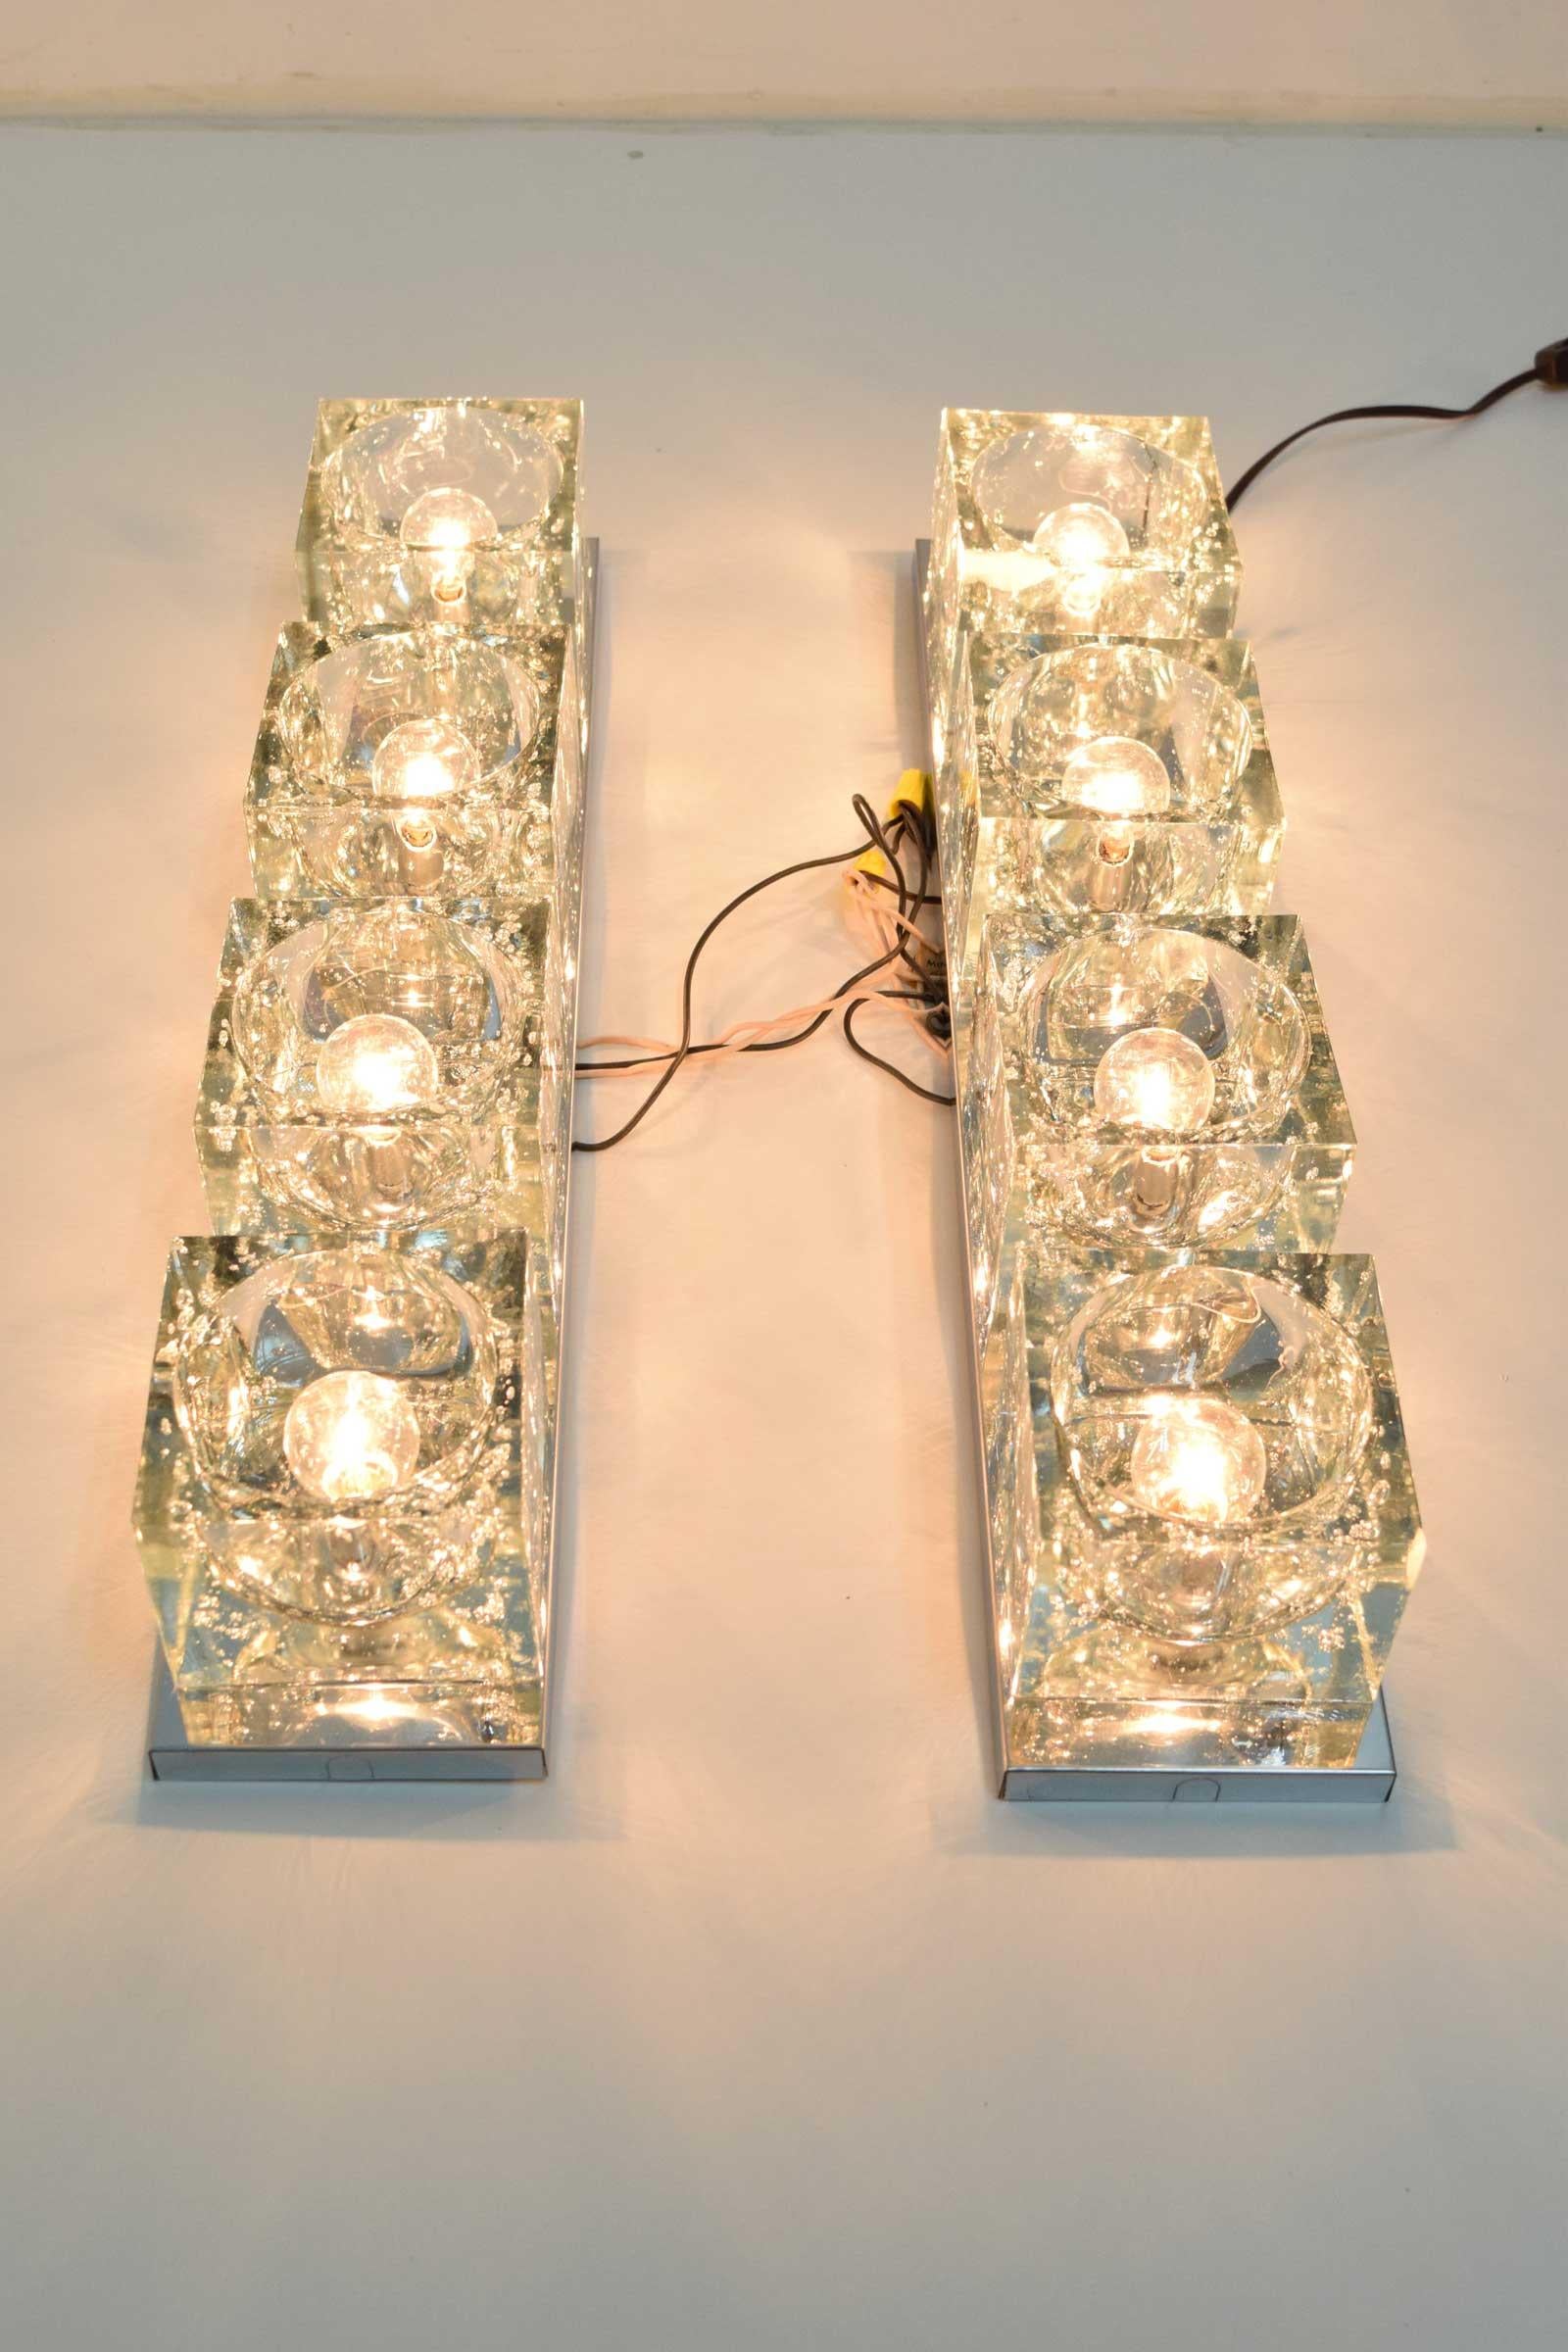 Pair of Midcentury Wall Lights with Cubist Design by Sciolari for Lightolier For Sale 2